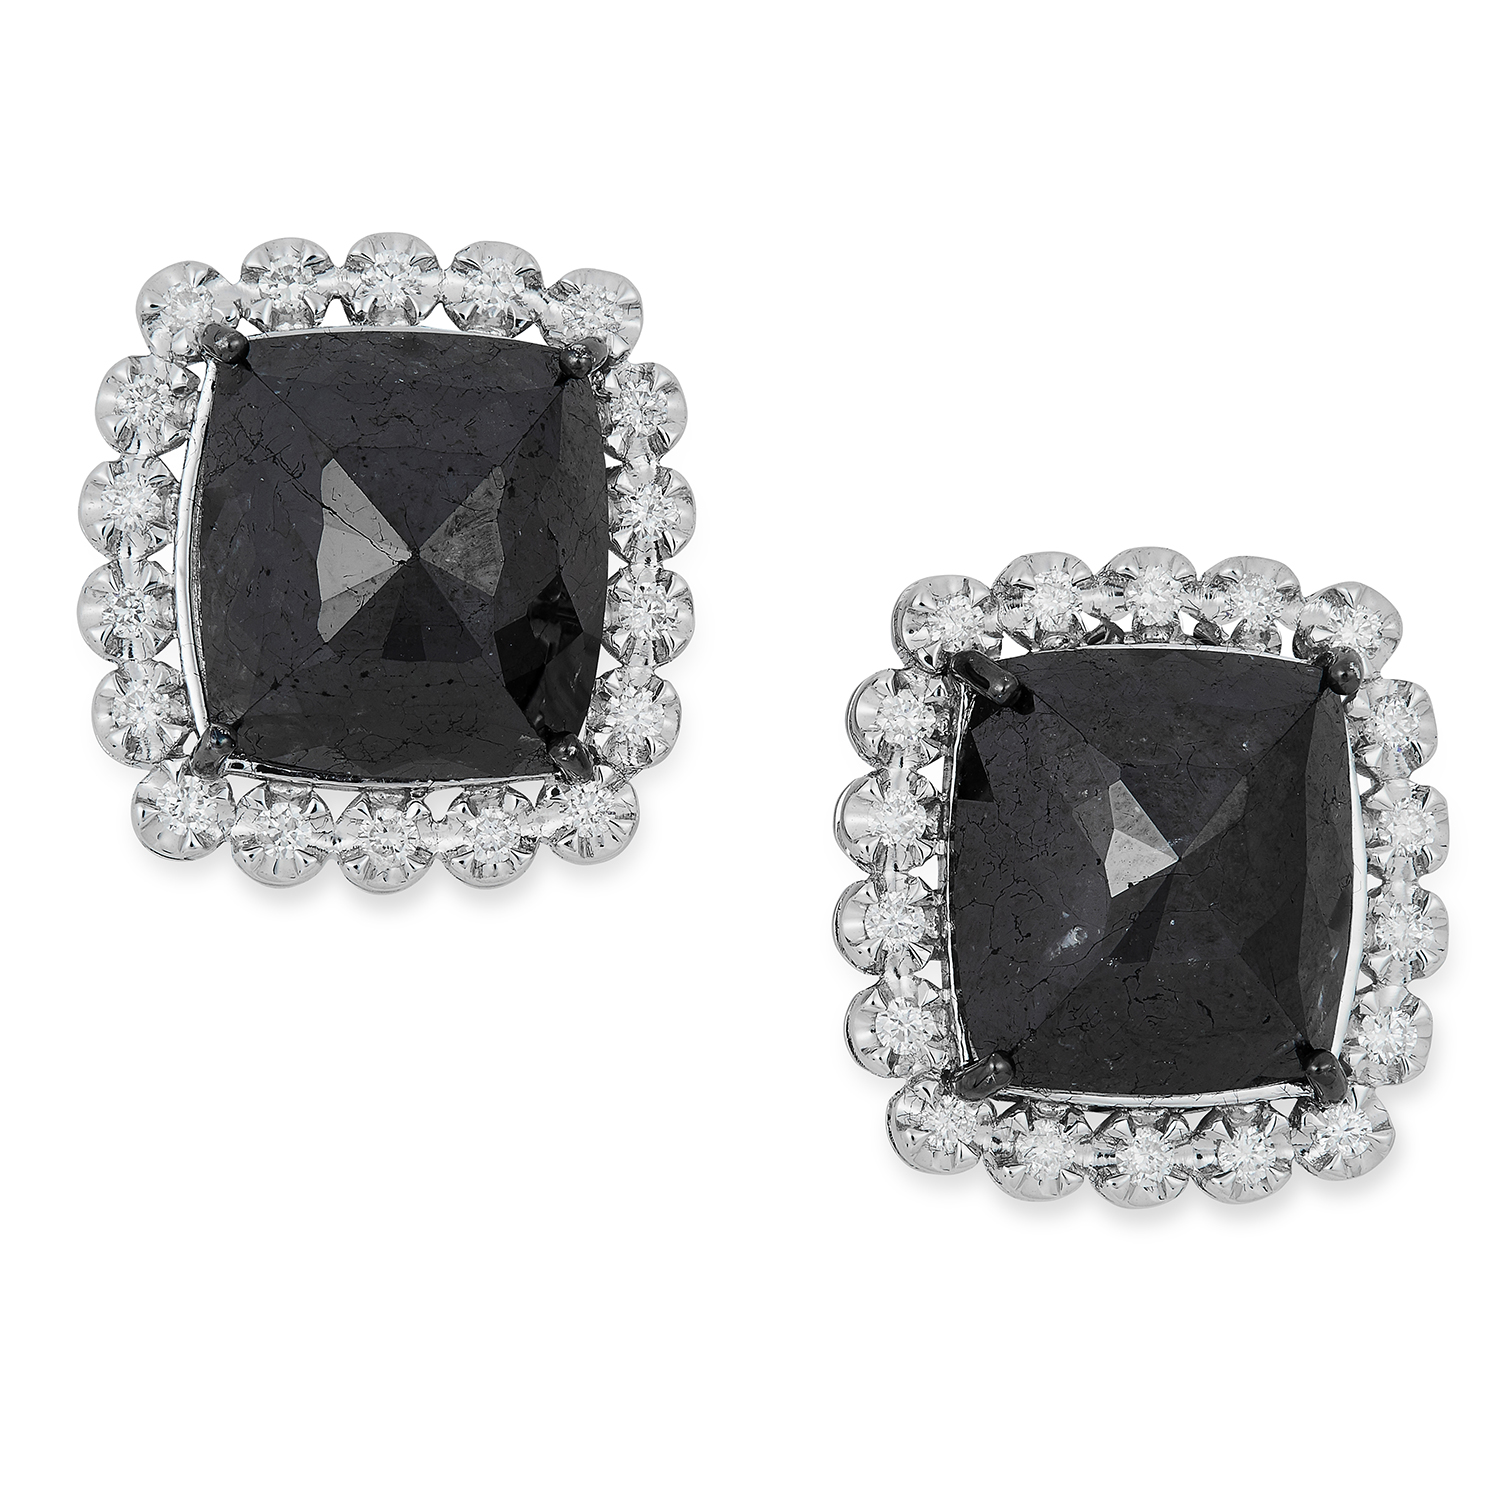 BLACK DIAMOND CLUSTER EARRINGS each set with a faceted black diamond in a border of round cut